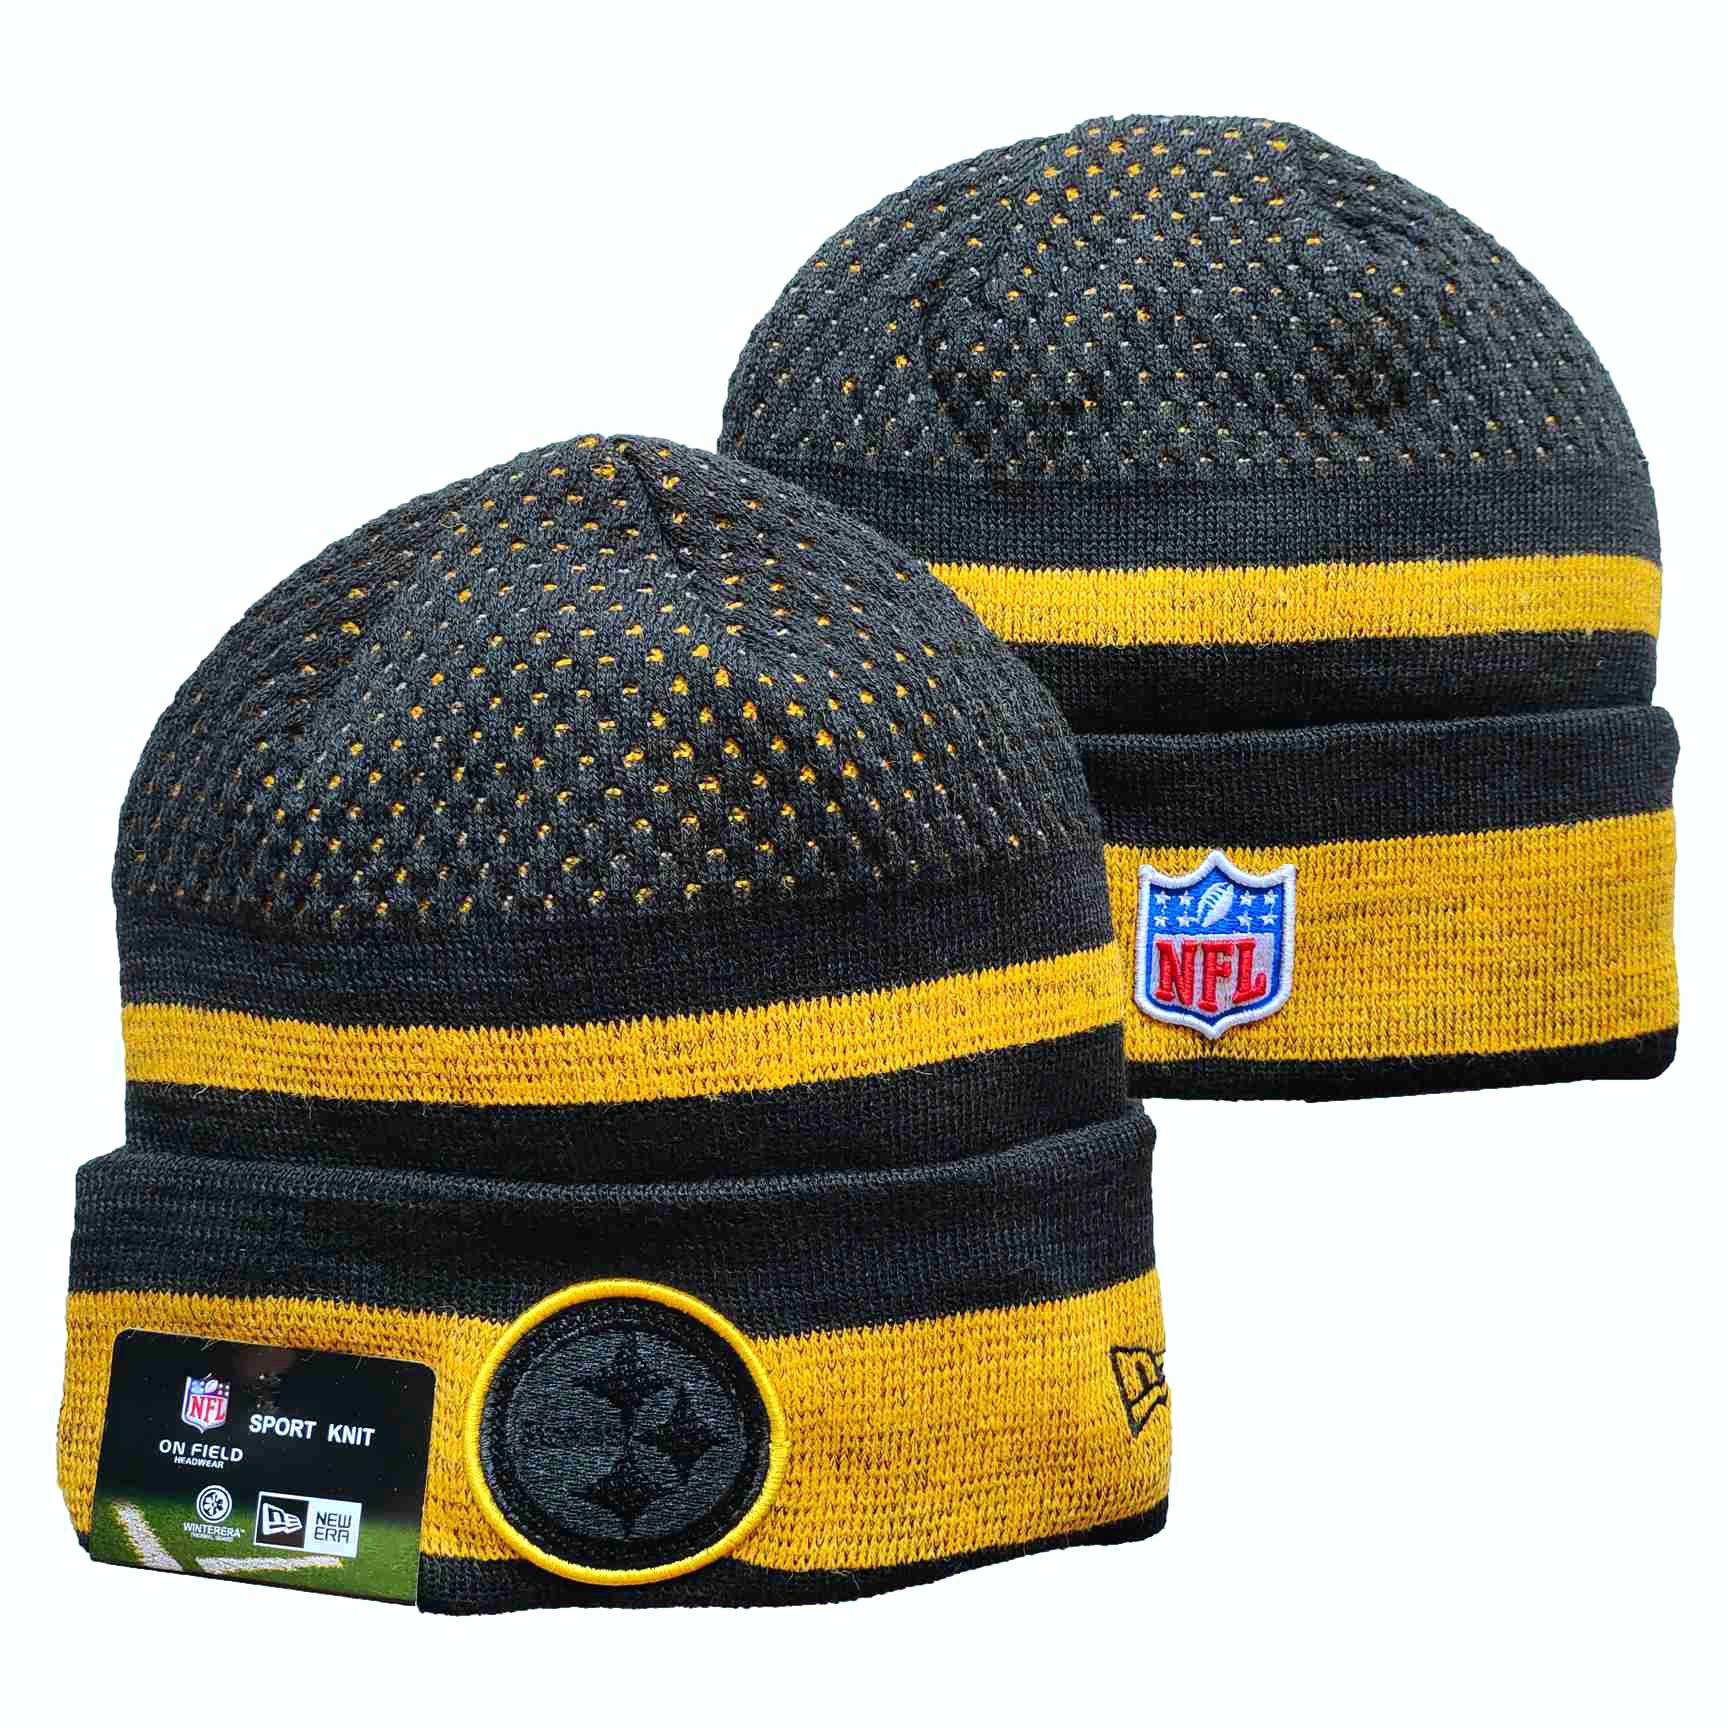 NFL Pittsburgh Steelers Beanies Knit Hats-YD1160